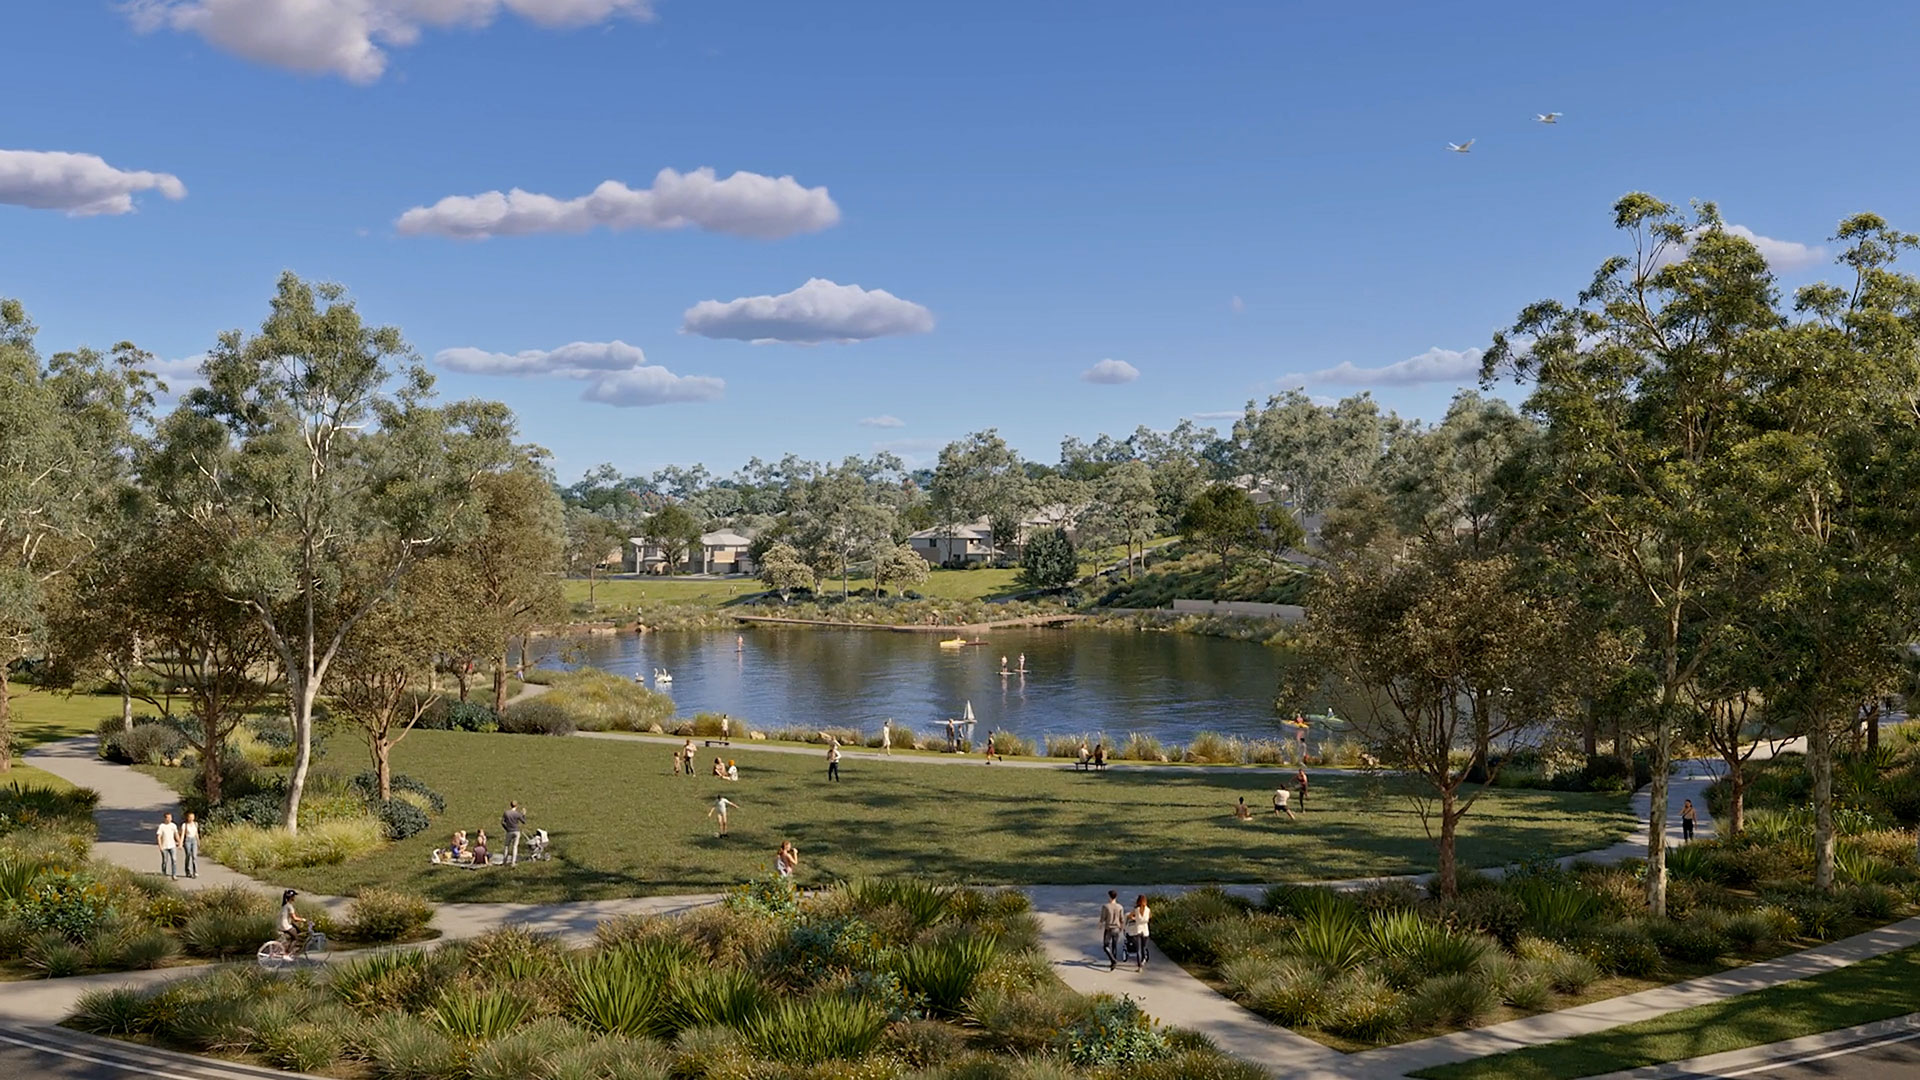 An artist’s impression of the future of the Appin project.